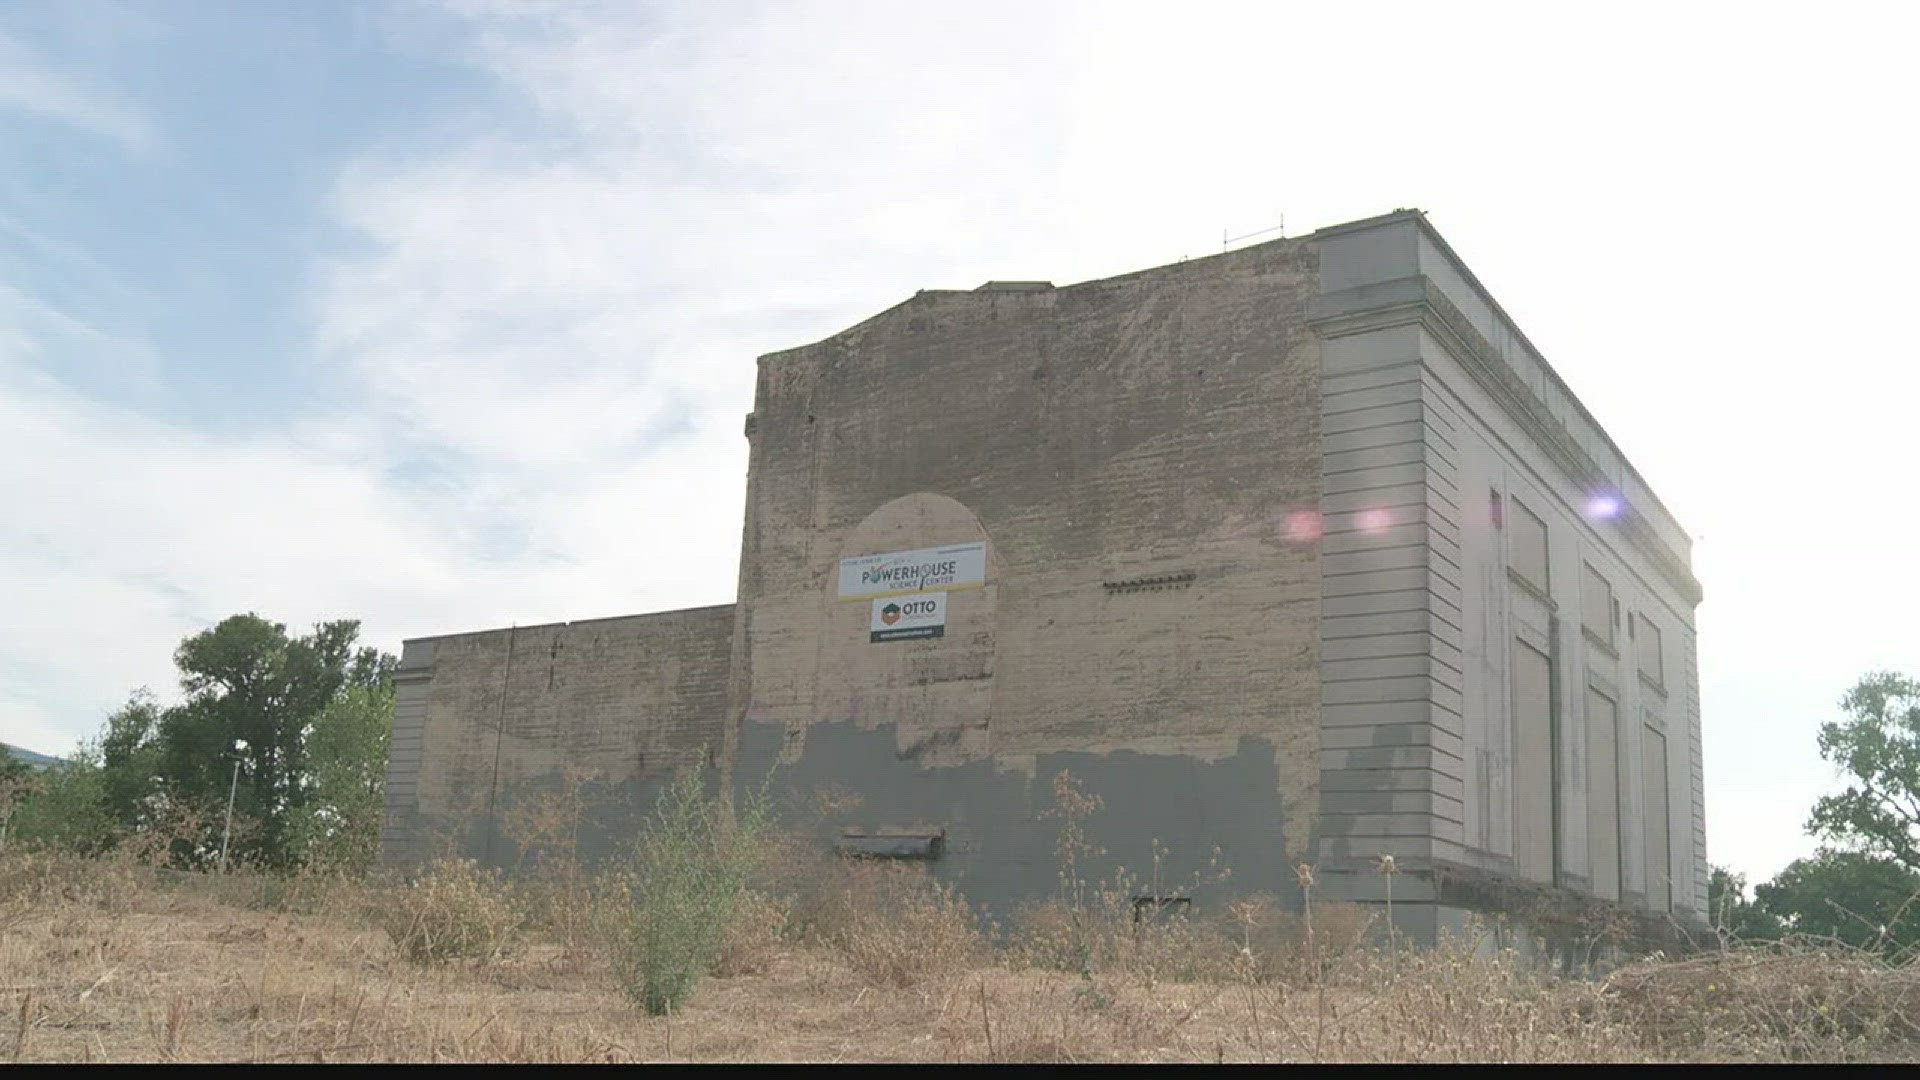 An old PG&E power station will become the home for the new Powerhouse Science Center.